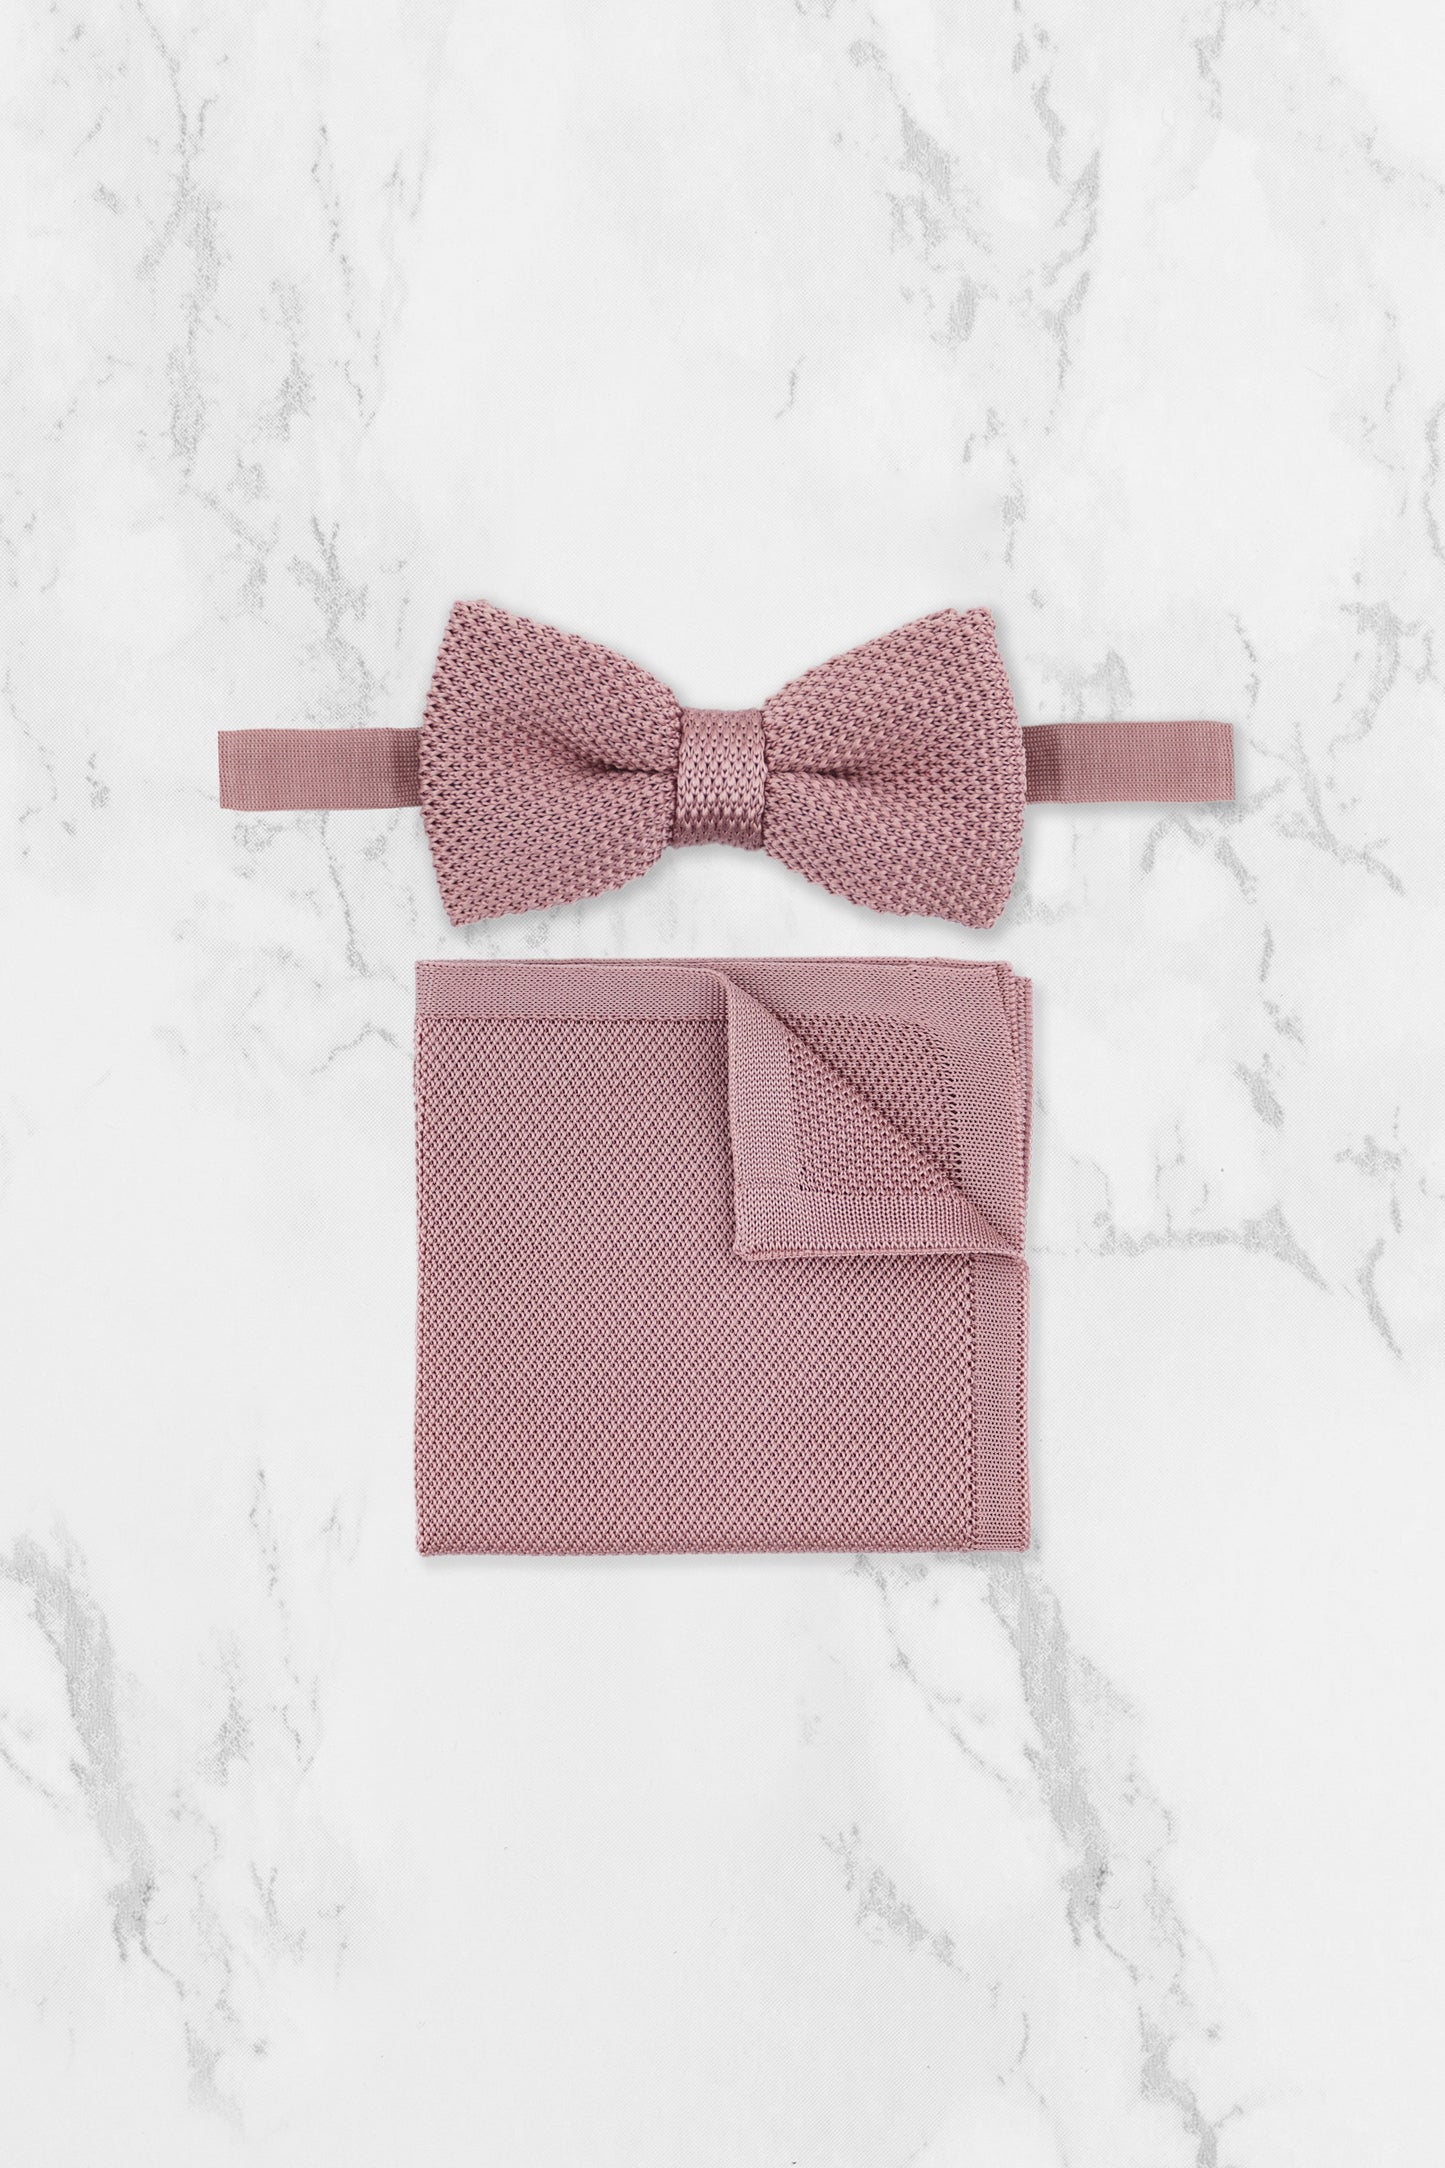 100% Polyester Knitted Bow Tie - Dusty Pink